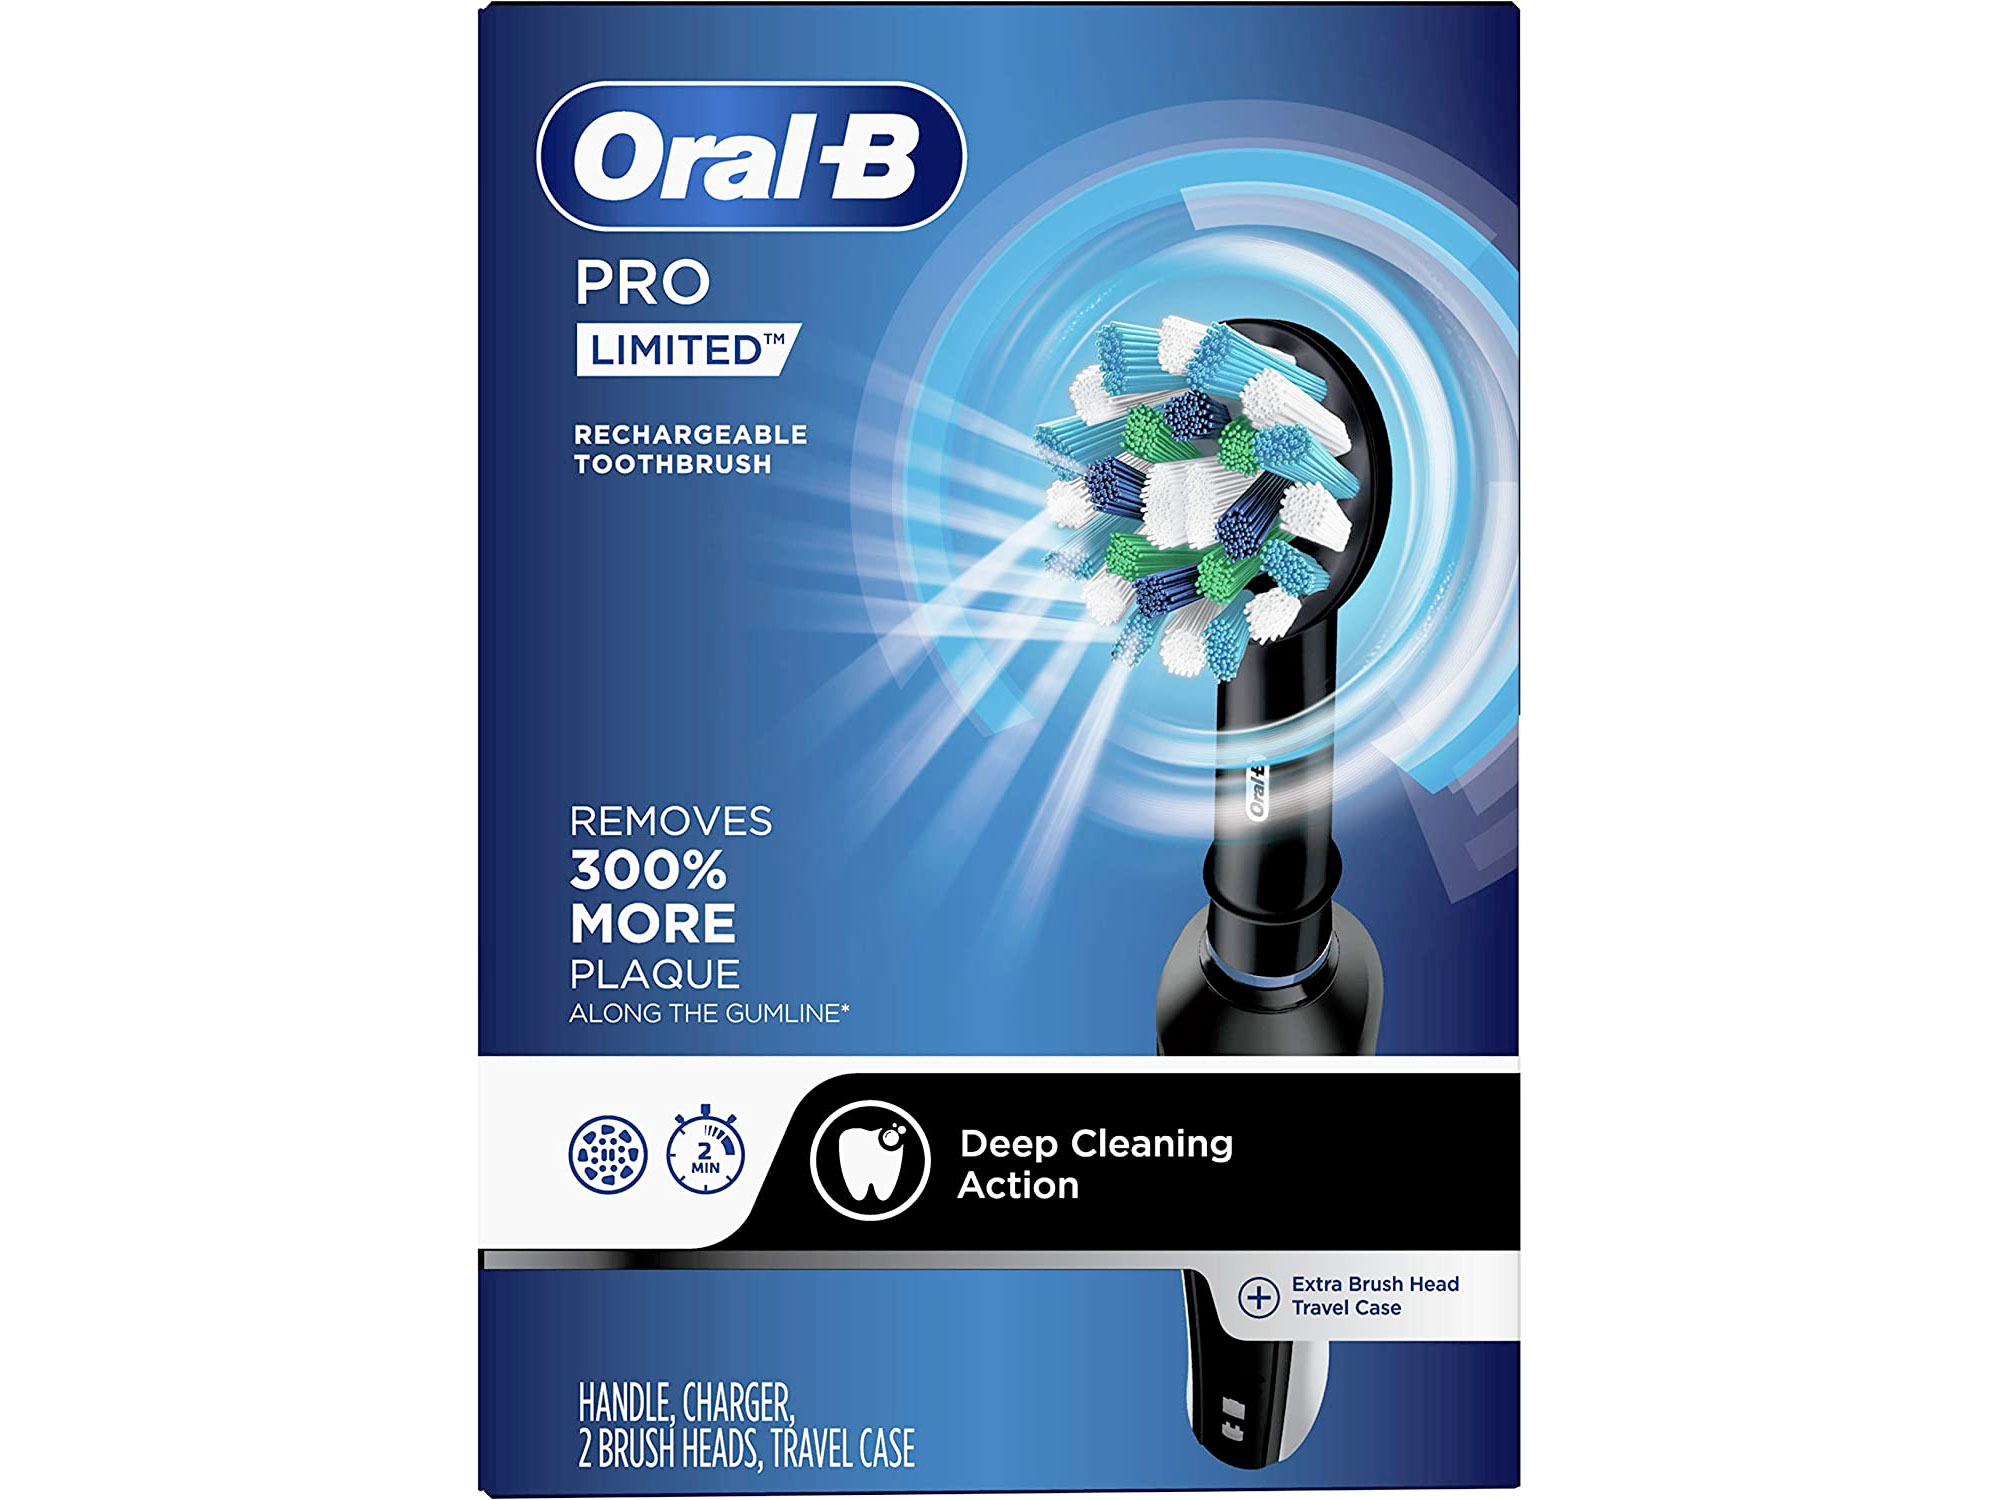 Amazon：Oral-B Pro Limited Rechargeable Electric Toothbrush只卖$59.99(只限Prime会员)